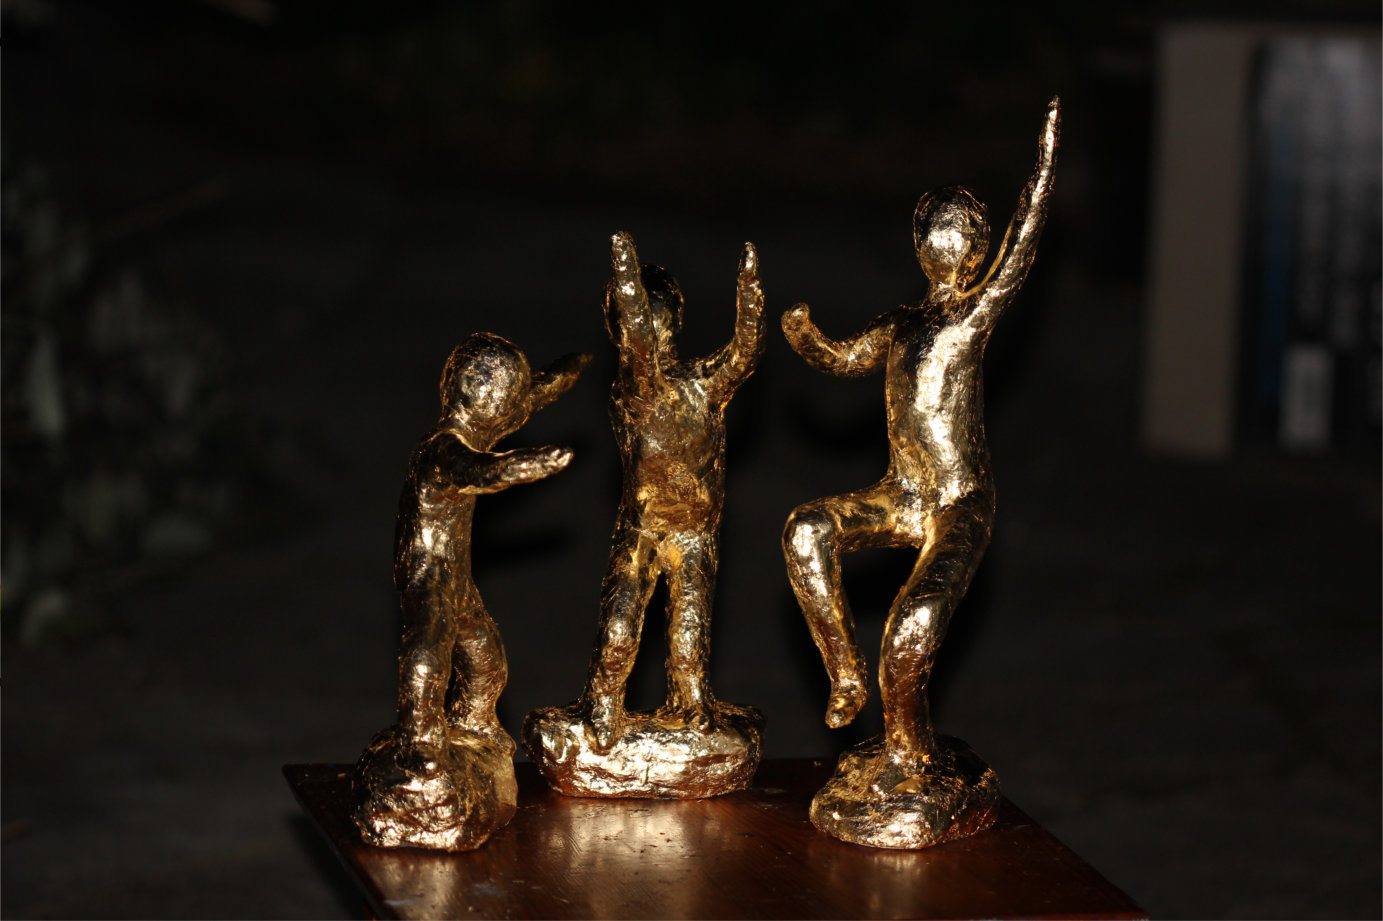 Group of three sculptures of abstract people dancing gold leafed